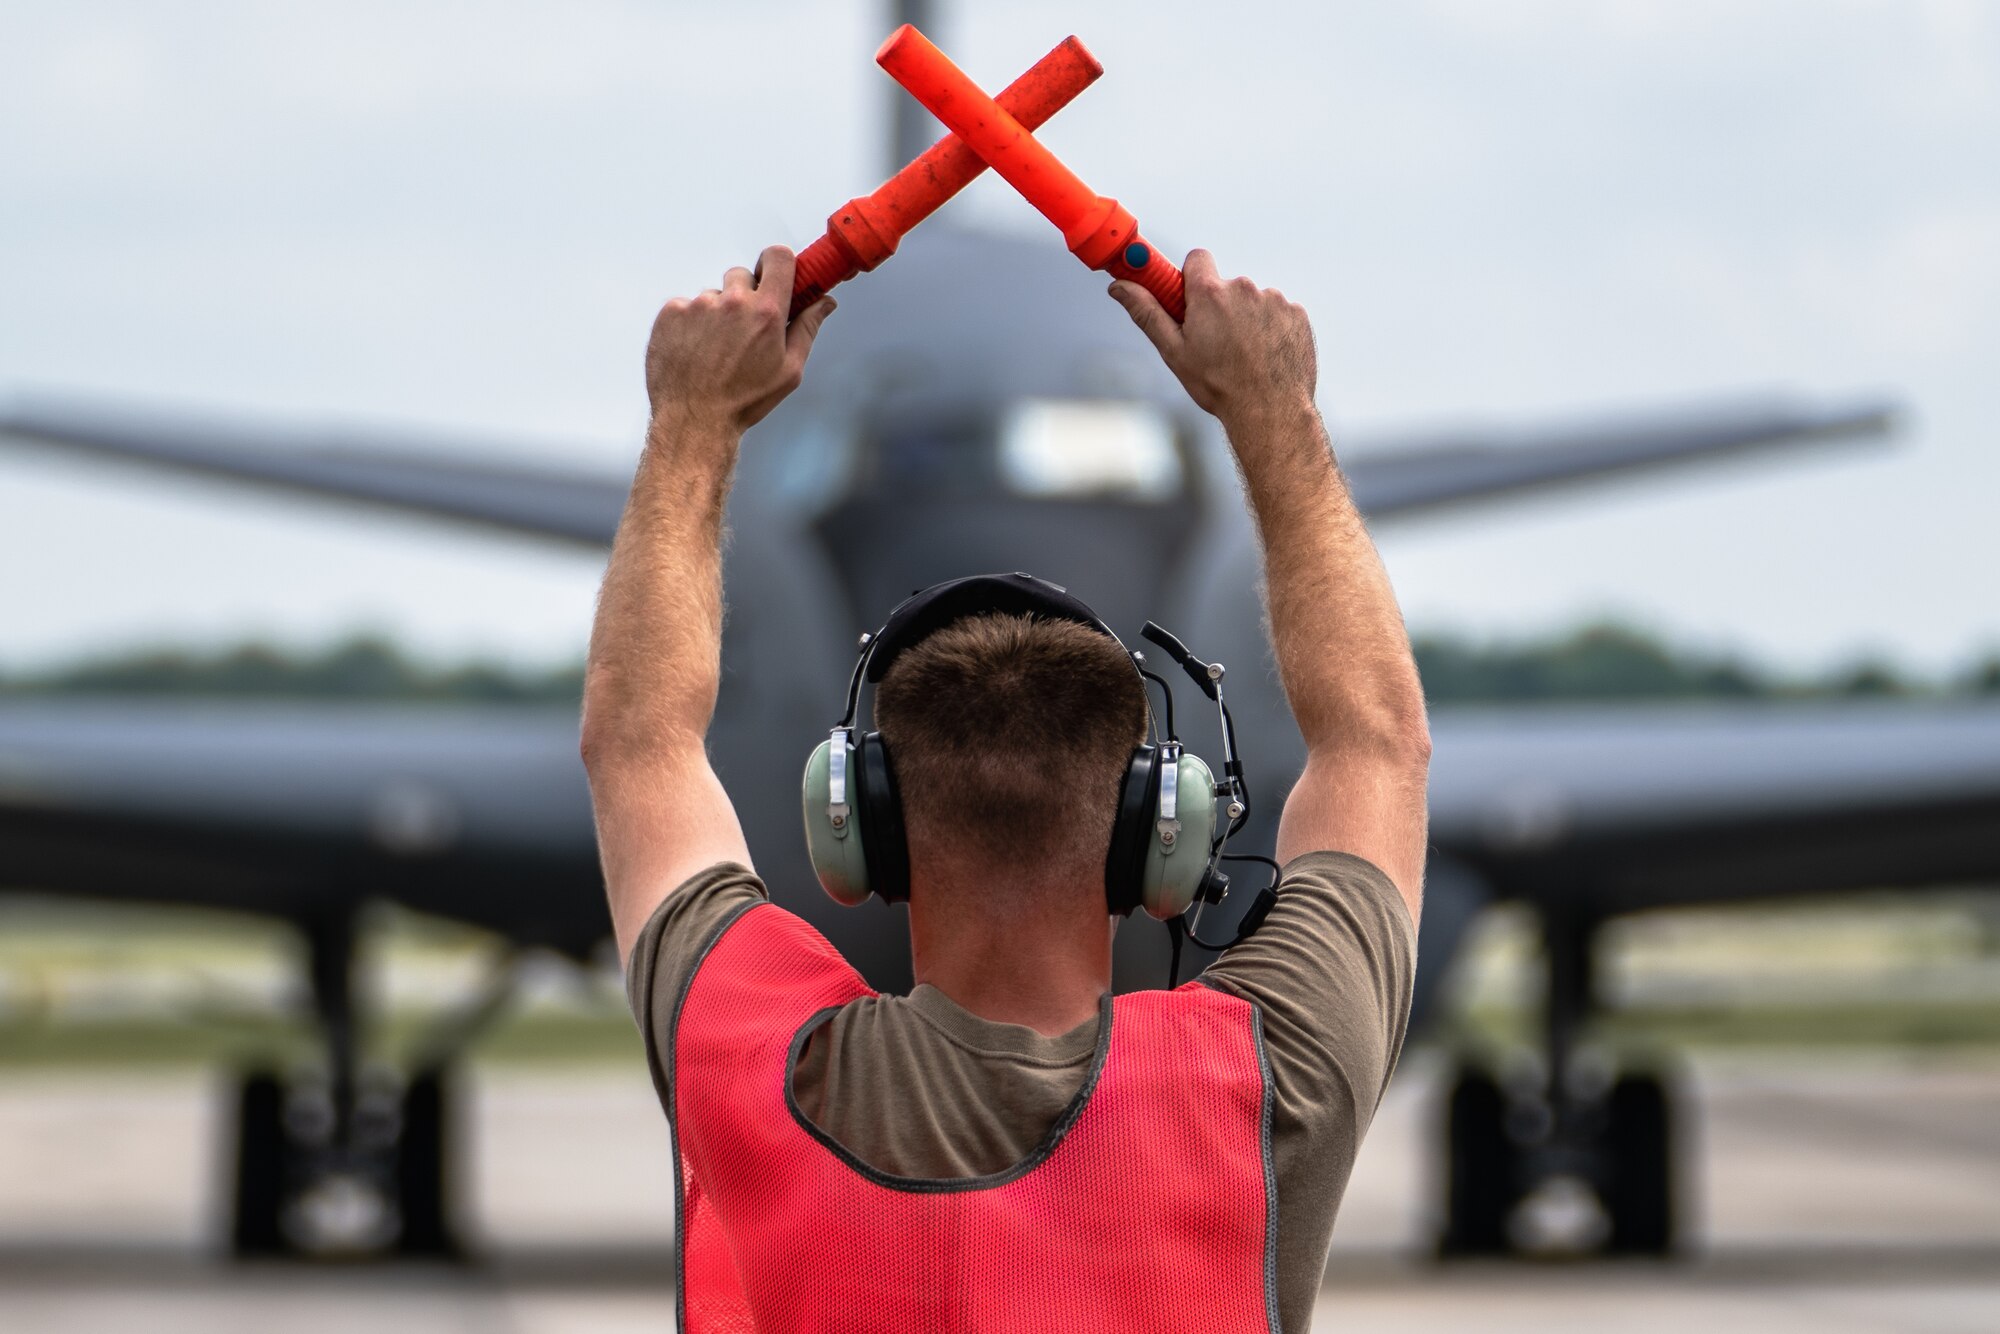 U.S. Air Force Staff Sgt. Garrett Byers, 6th Maintenance Squadron hydraulics specialist, marshals a KC-135 Stratotanker aircraft assigned to the 6th Air Refueling Wing during the Agile Combat Employment capstone exercise at Joint Base Charleston, South Carolina, Aug. 23, 2022.